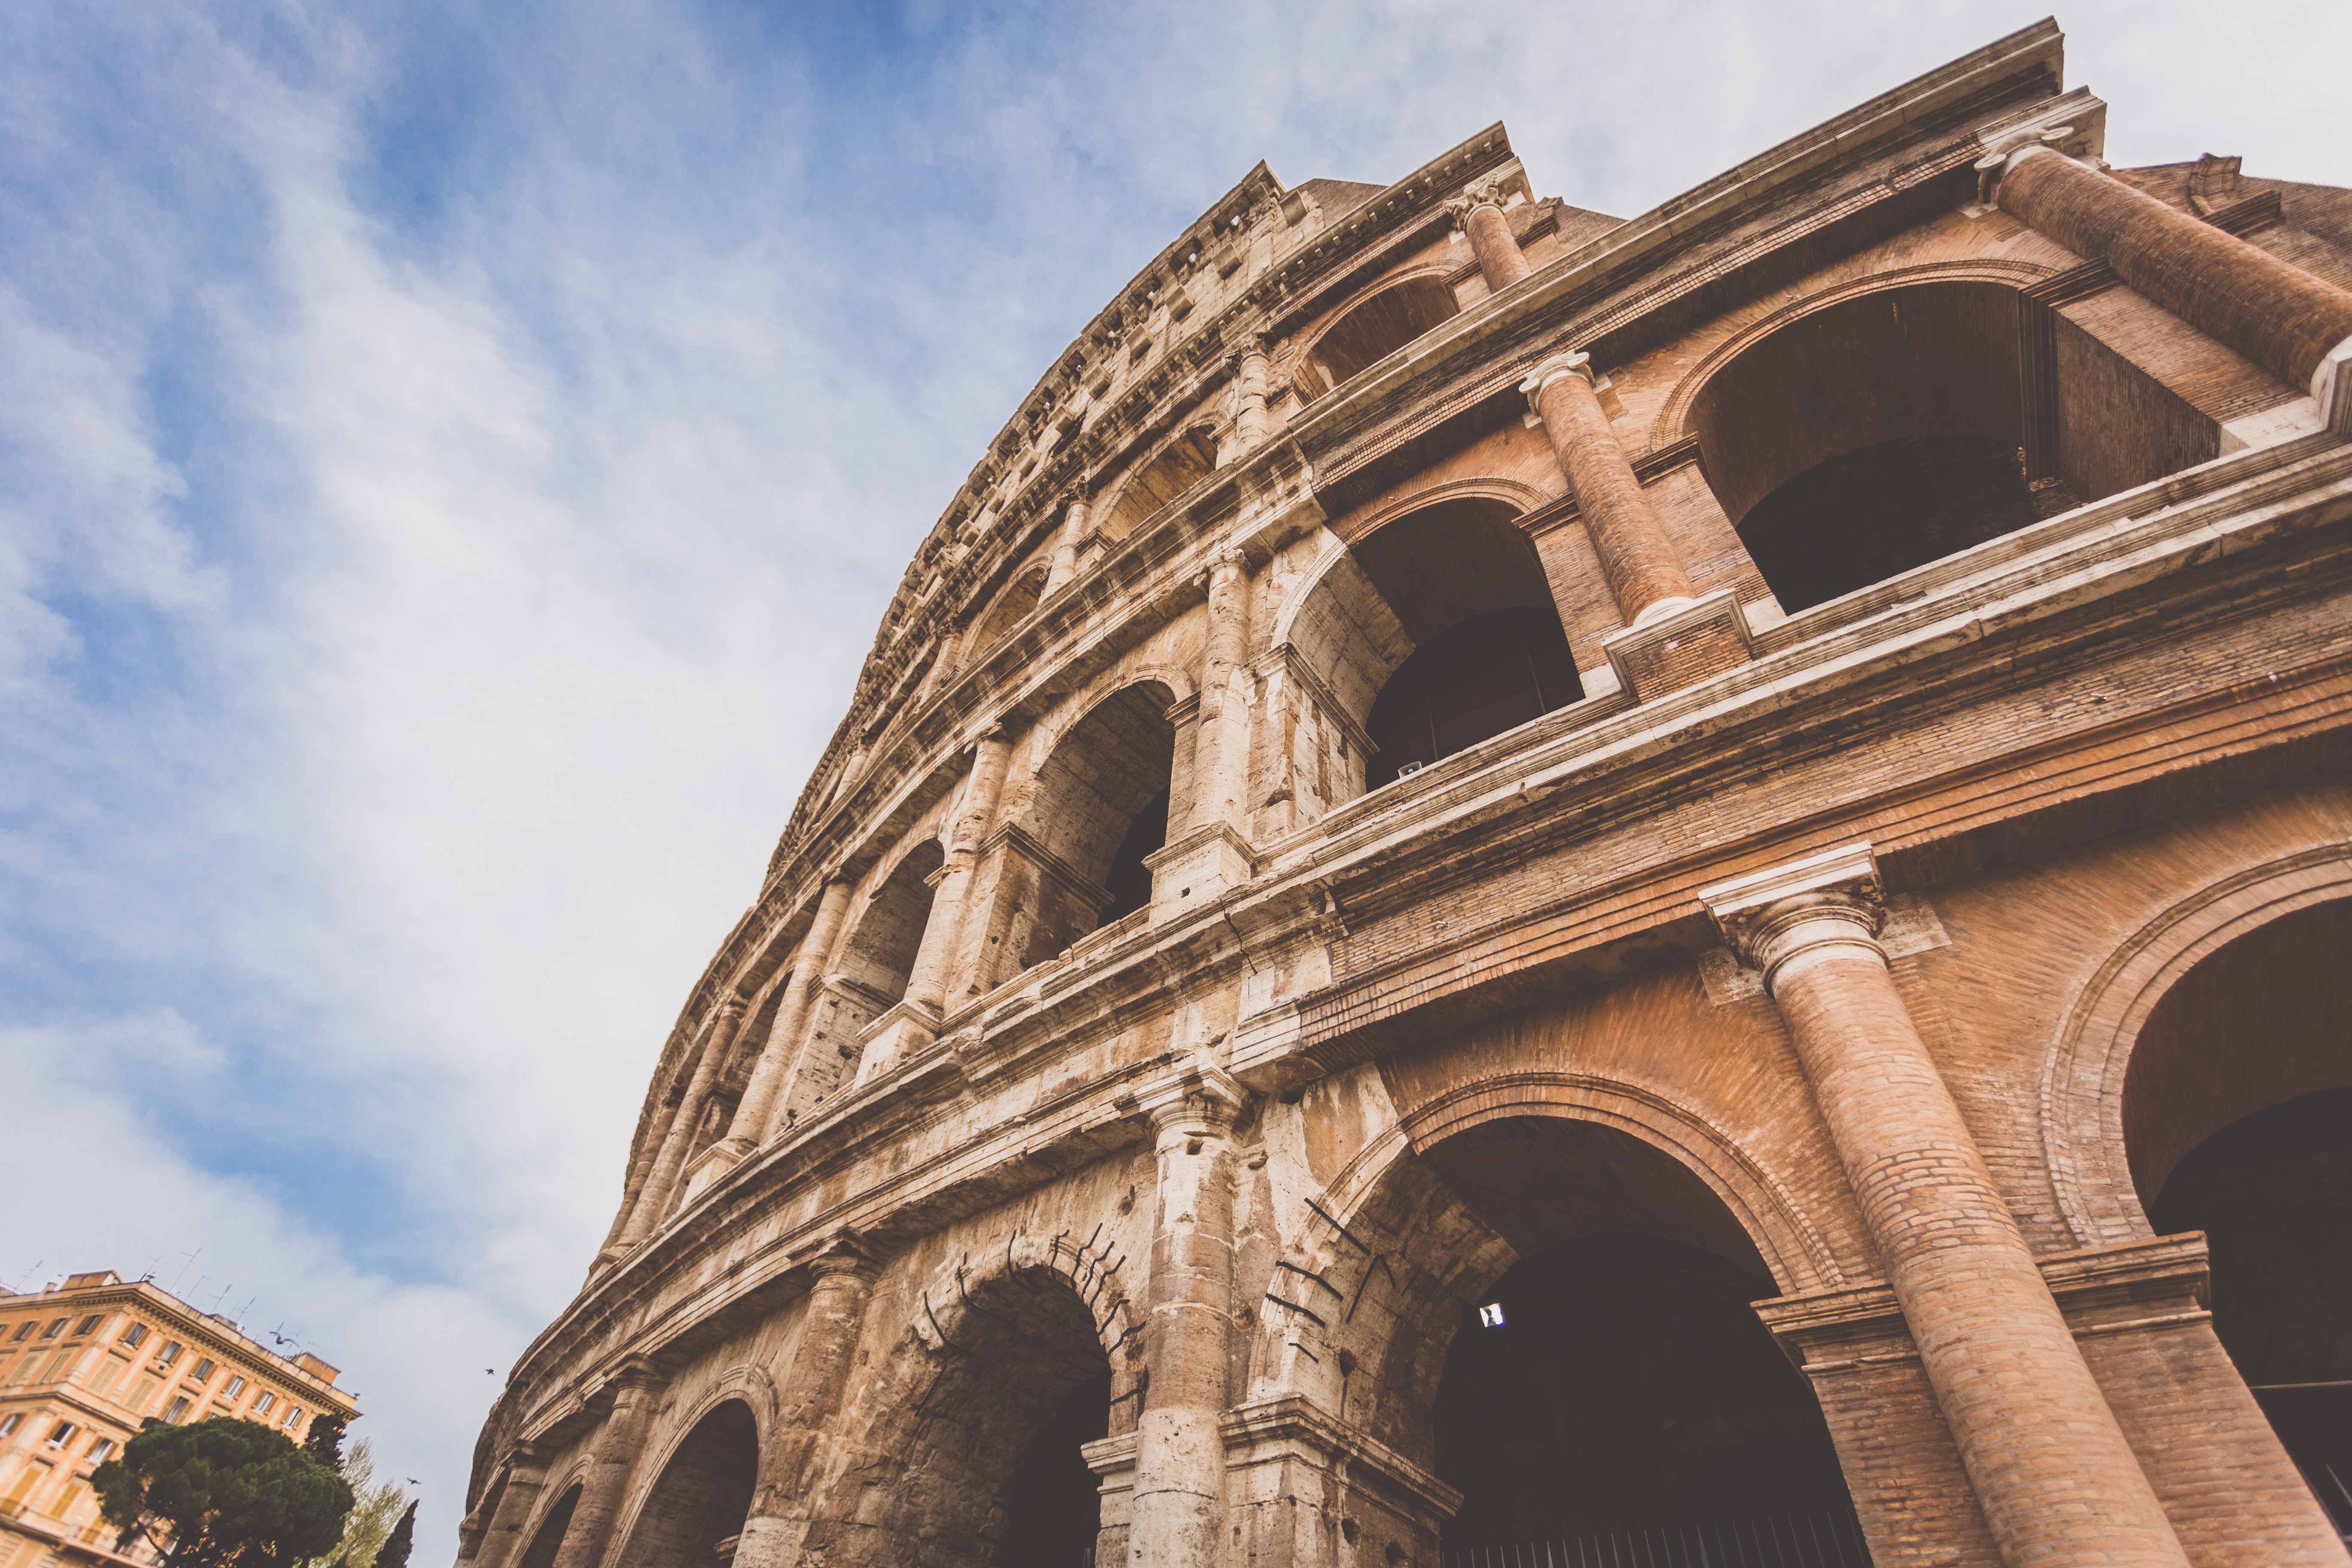 The Colosseum in Rome - One of the Best places to visit in Italy